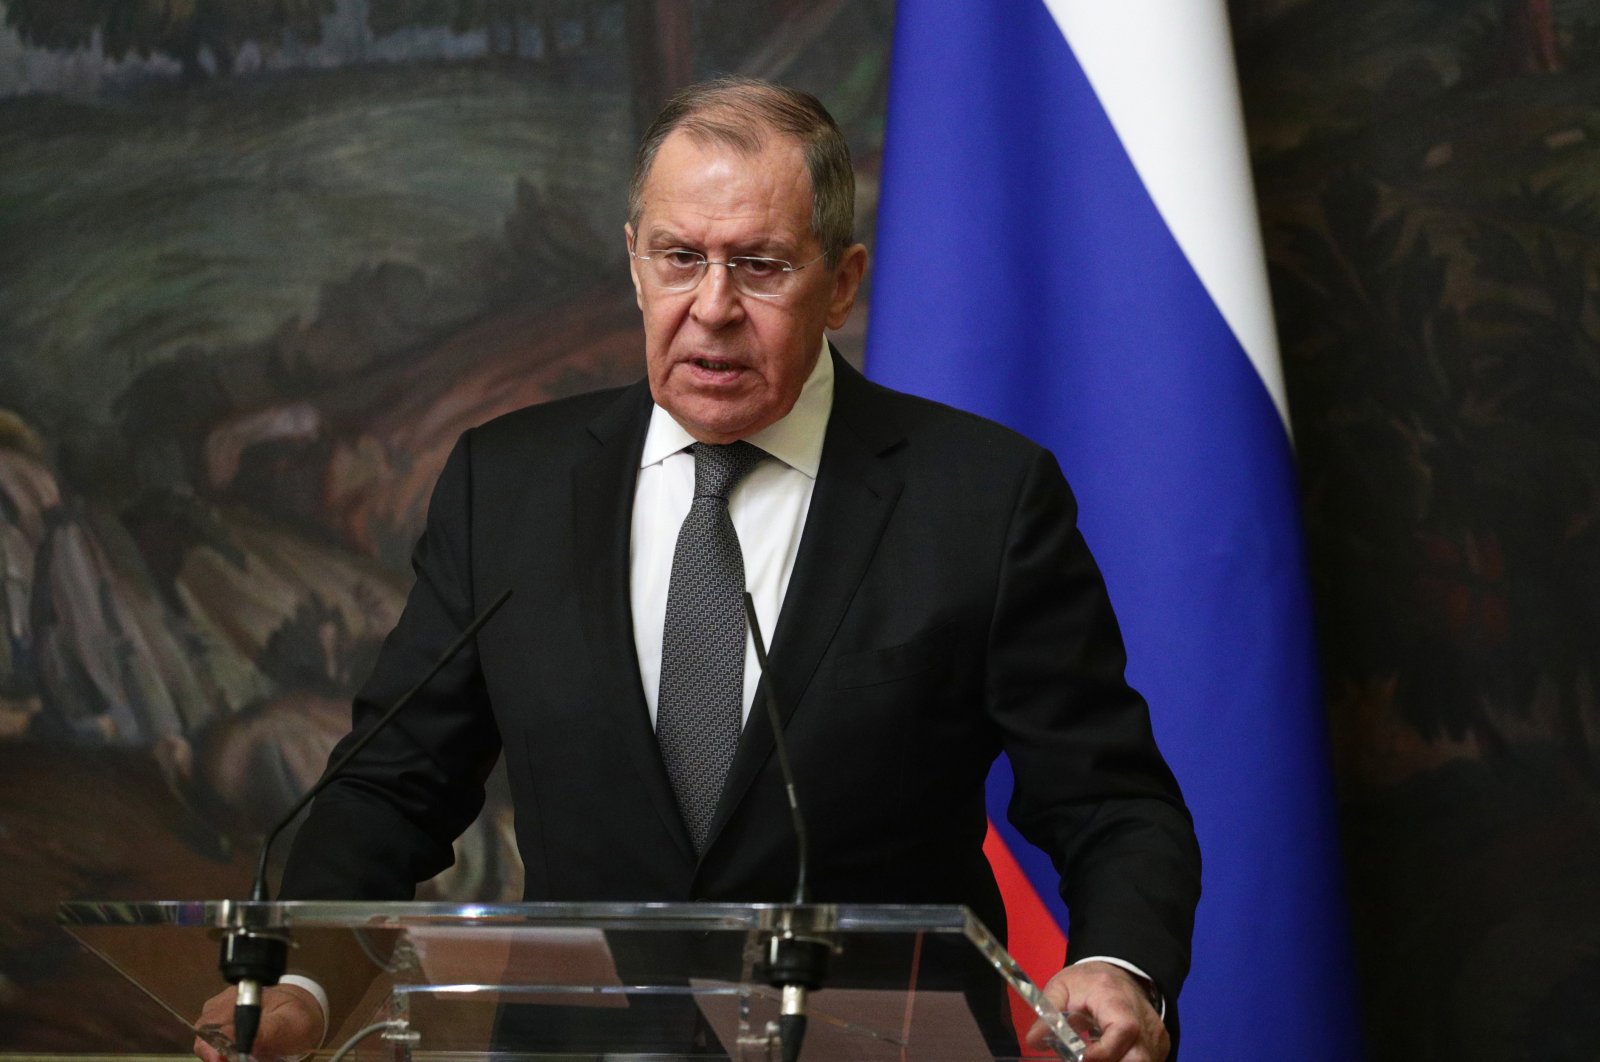 This Russian Foreign Affairs Ministry handout photo shows Foreign Minister Sergei Lavrov during a news conference in Moscow, Russia, Dec. 14, 2020. (EPA Photo)